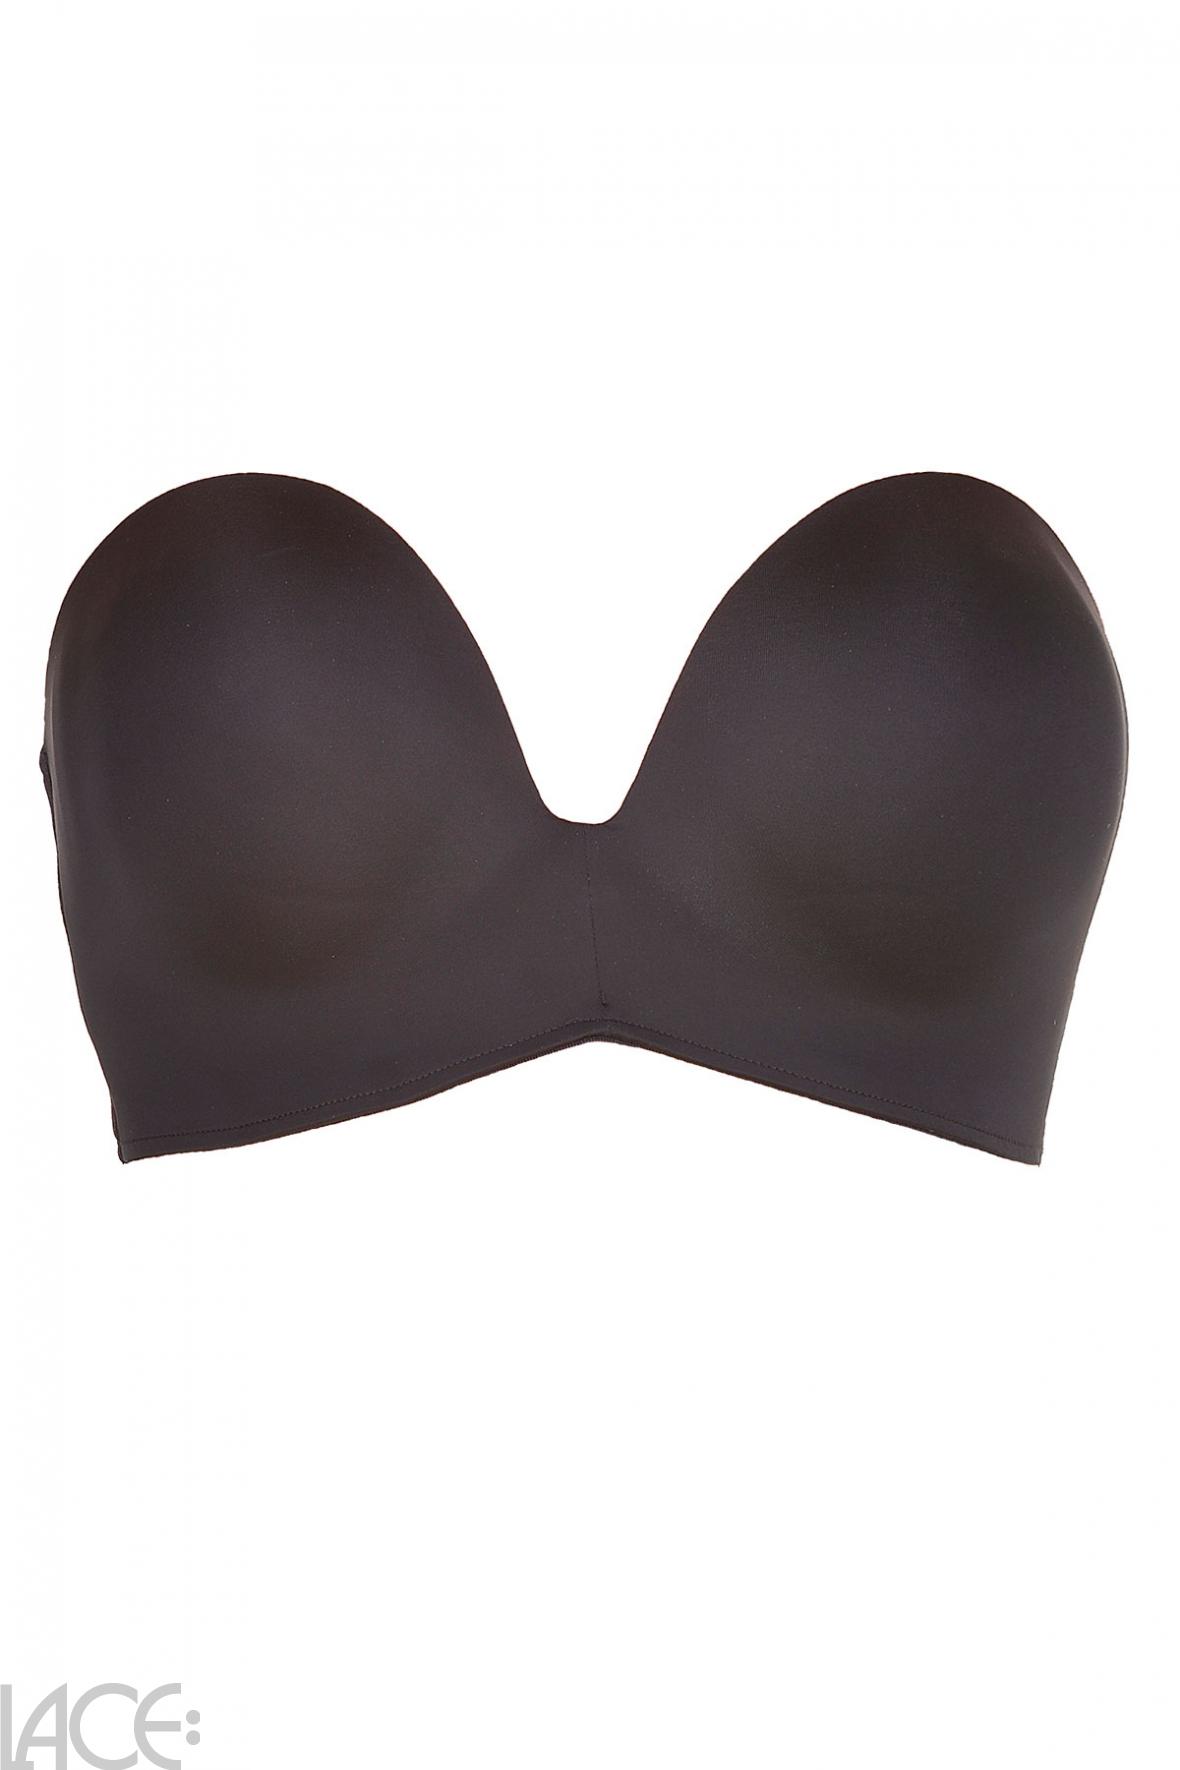 WONDERBRA NUDE MOULDED STRAPLESS PUSH UP BRA WITH HANDS INSIDE